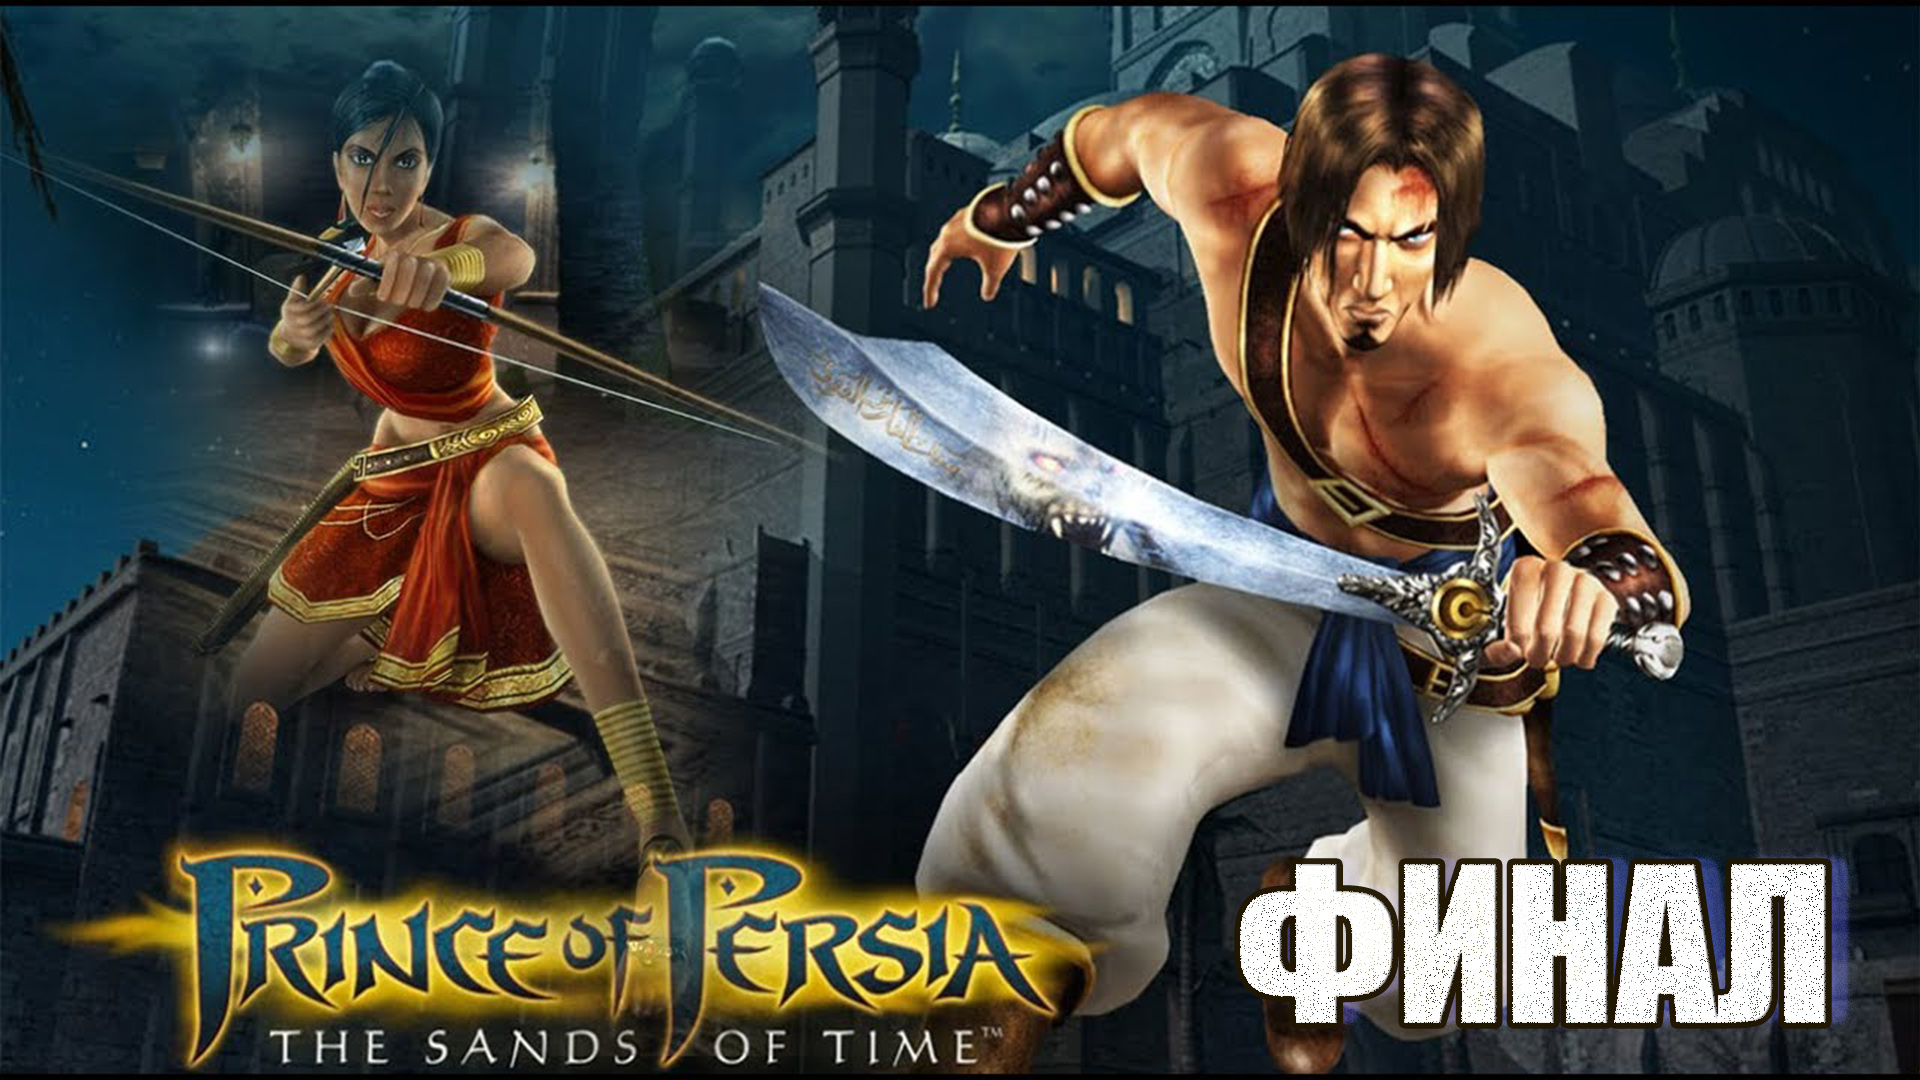 Prince of persia steam фото 102